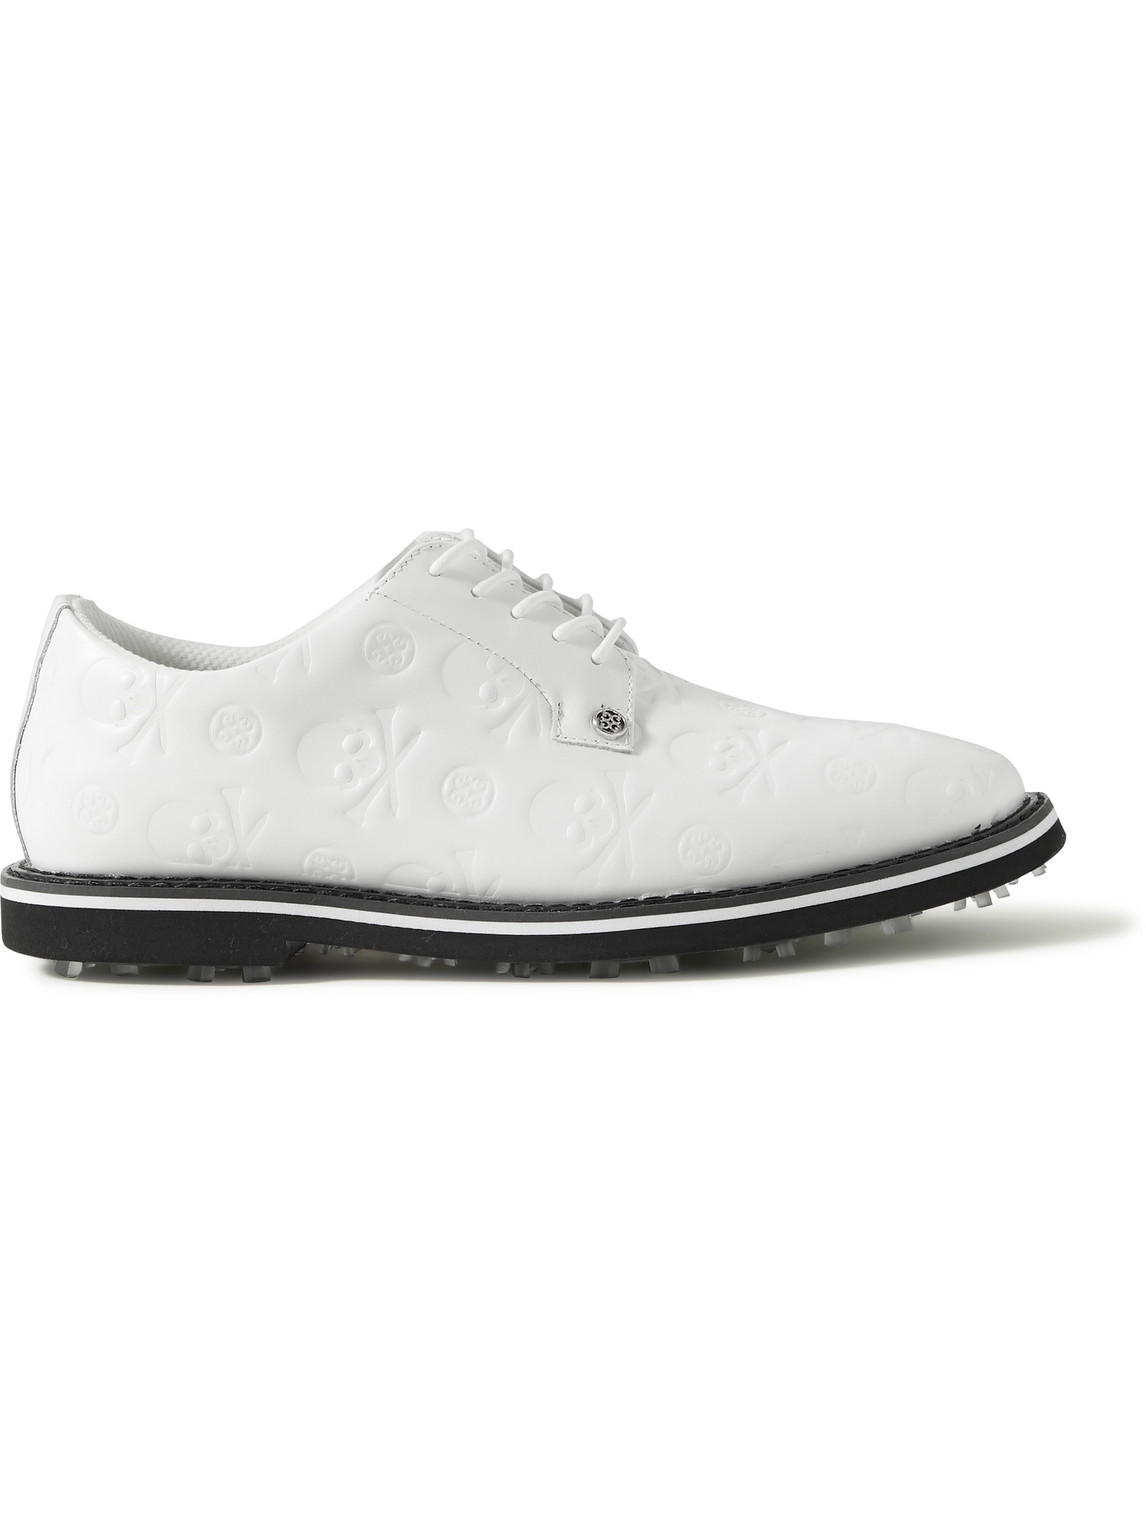 G/FORE Gallivanter Logo-Debossed Leather Golf Shoes